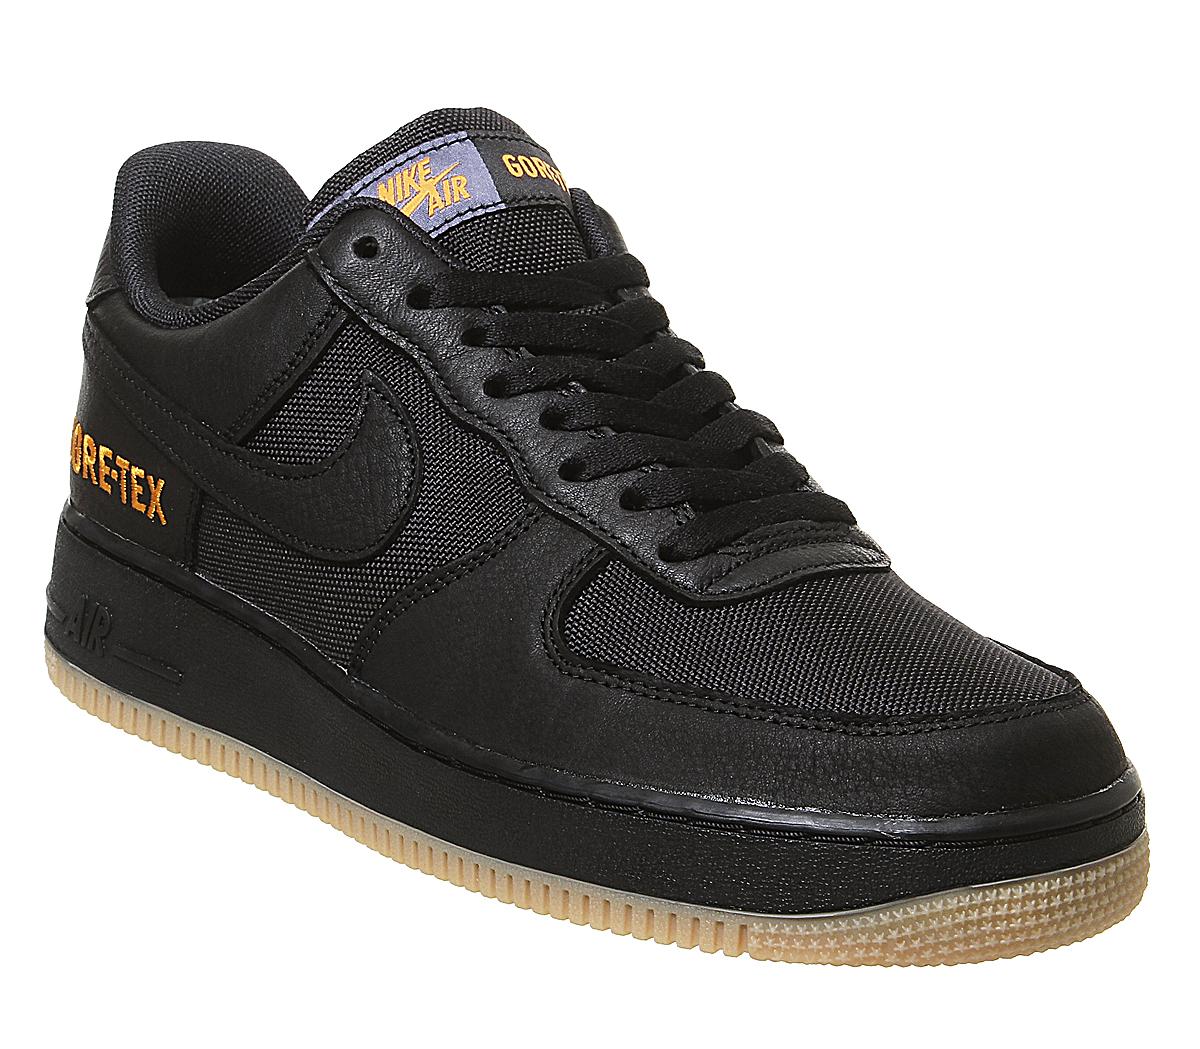 Nike Air Force 1 Gtx Trainers Black Light Carbon Bright ...